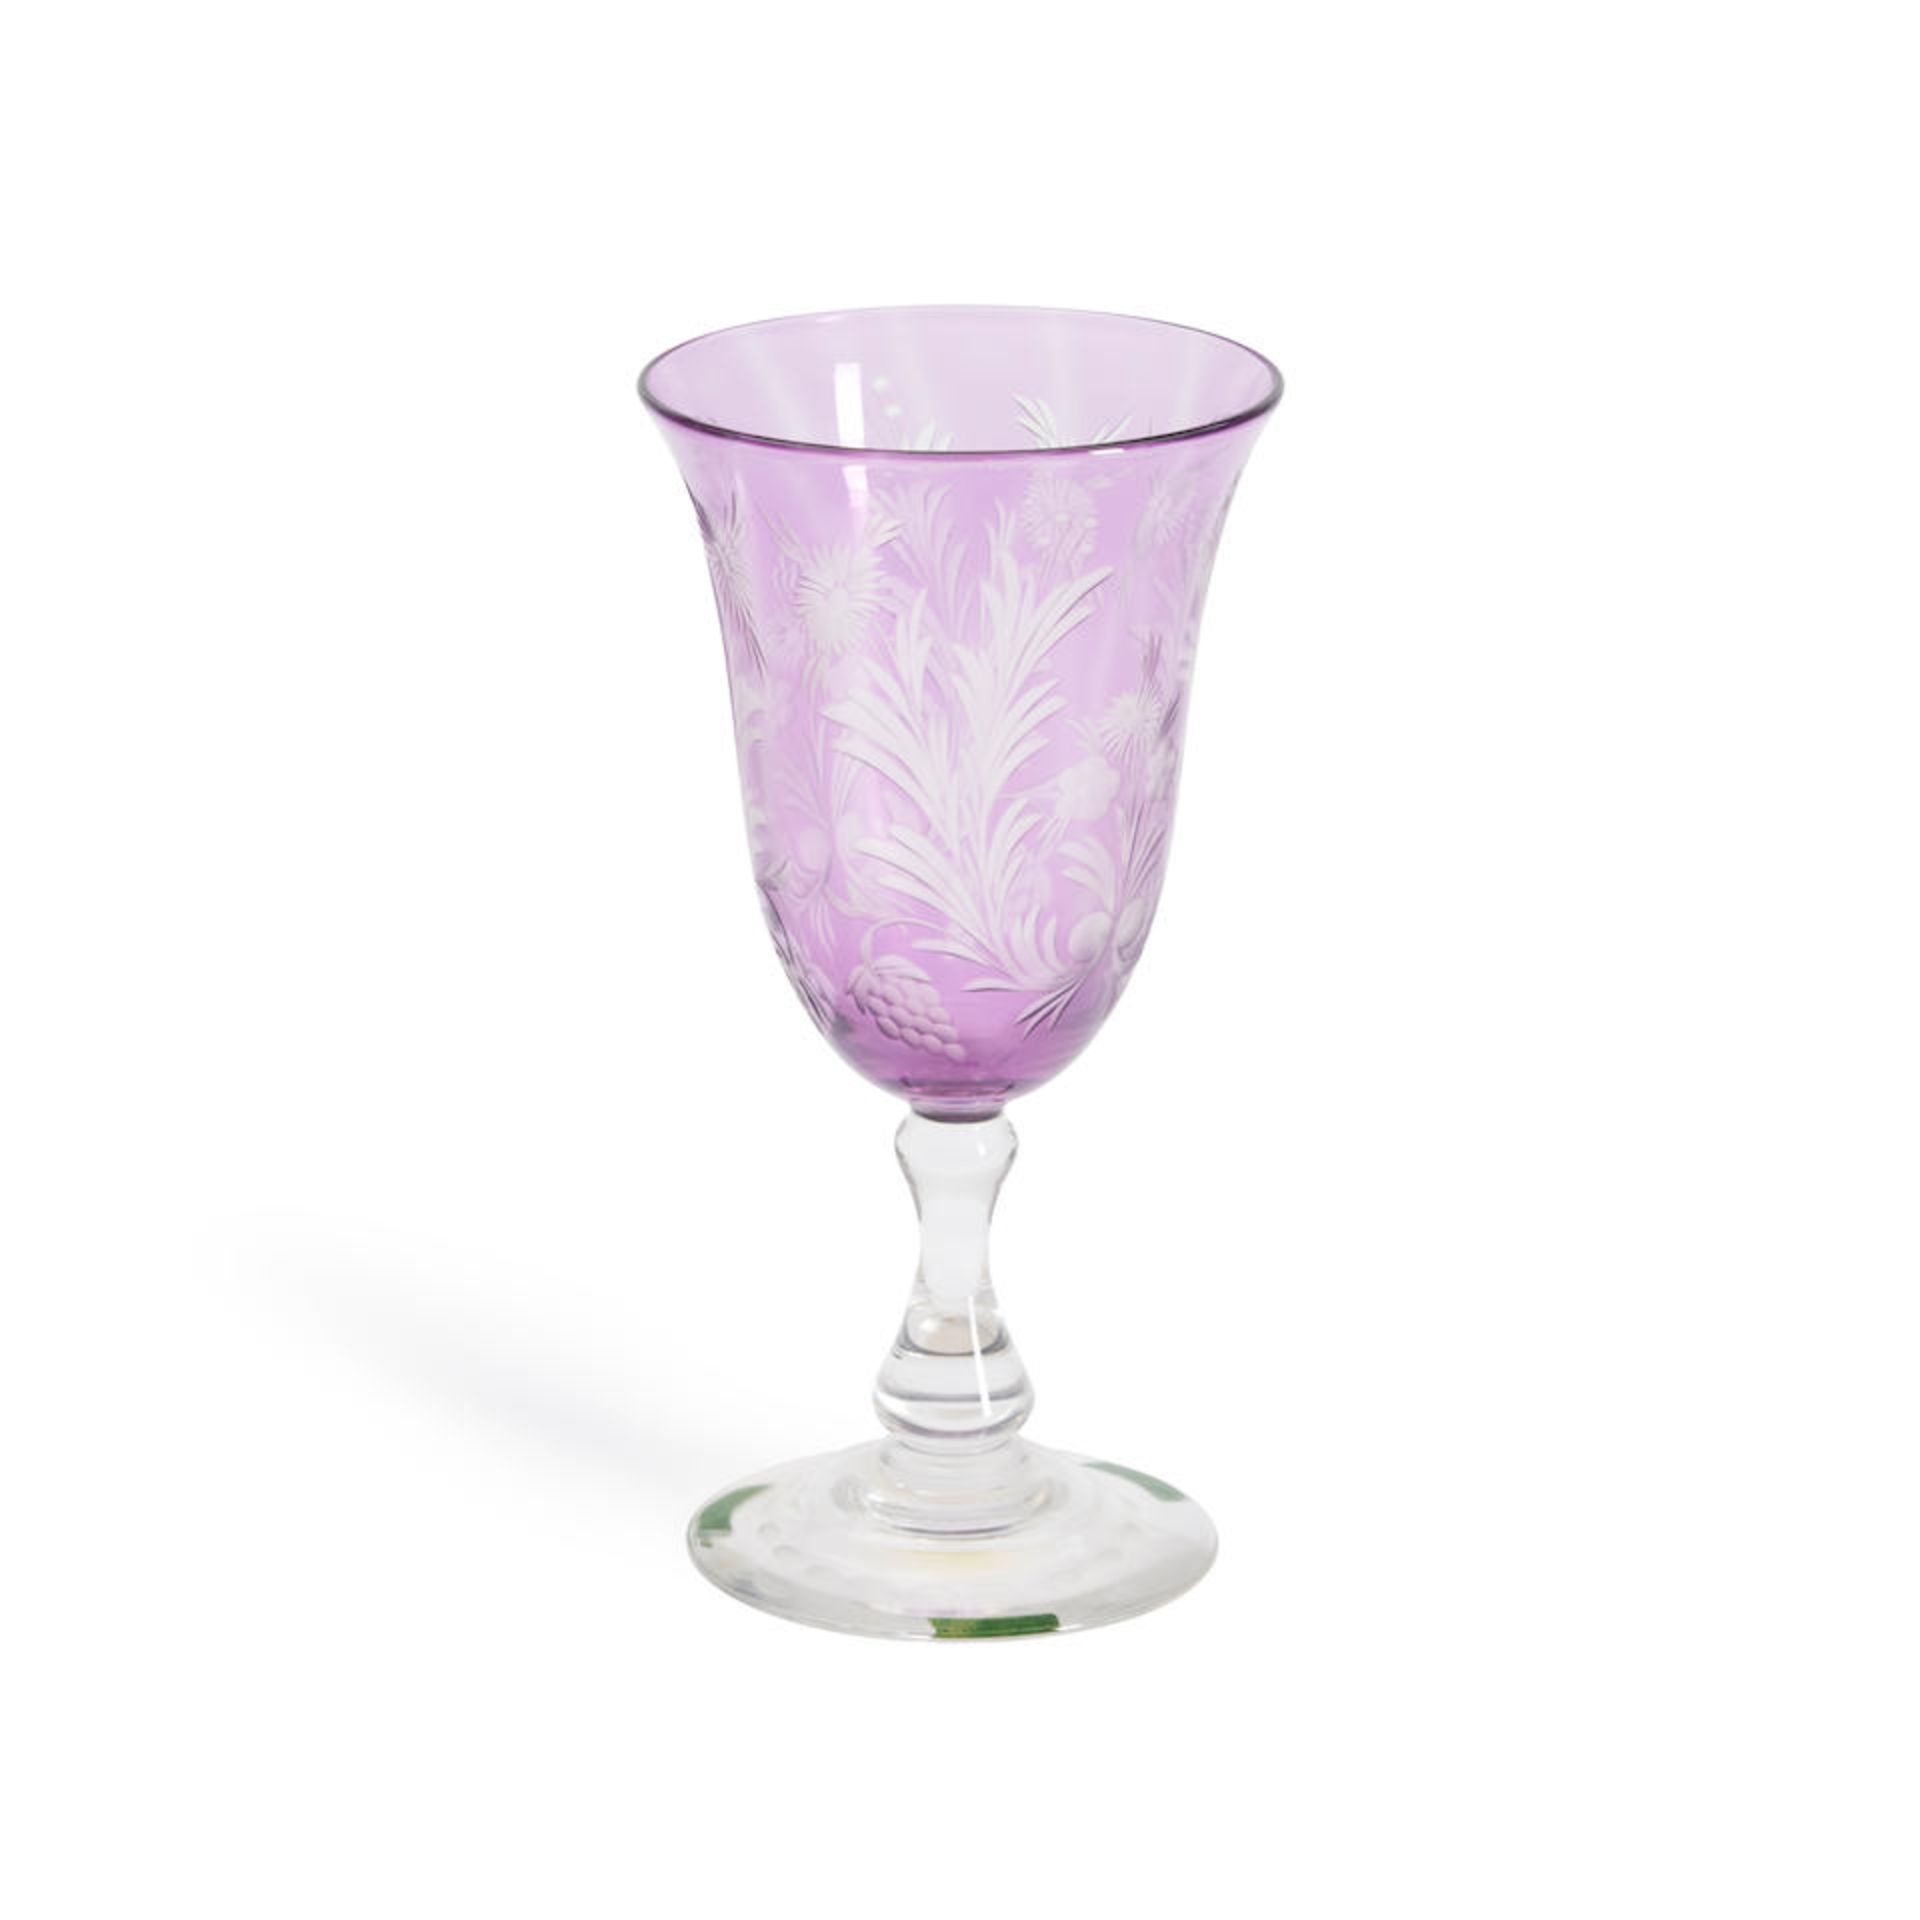 STEUBEN 'HUDSON' PATTERN ENGRAVED GLASS GOBLET, Corning, New York, early 20th century, unmarked,...